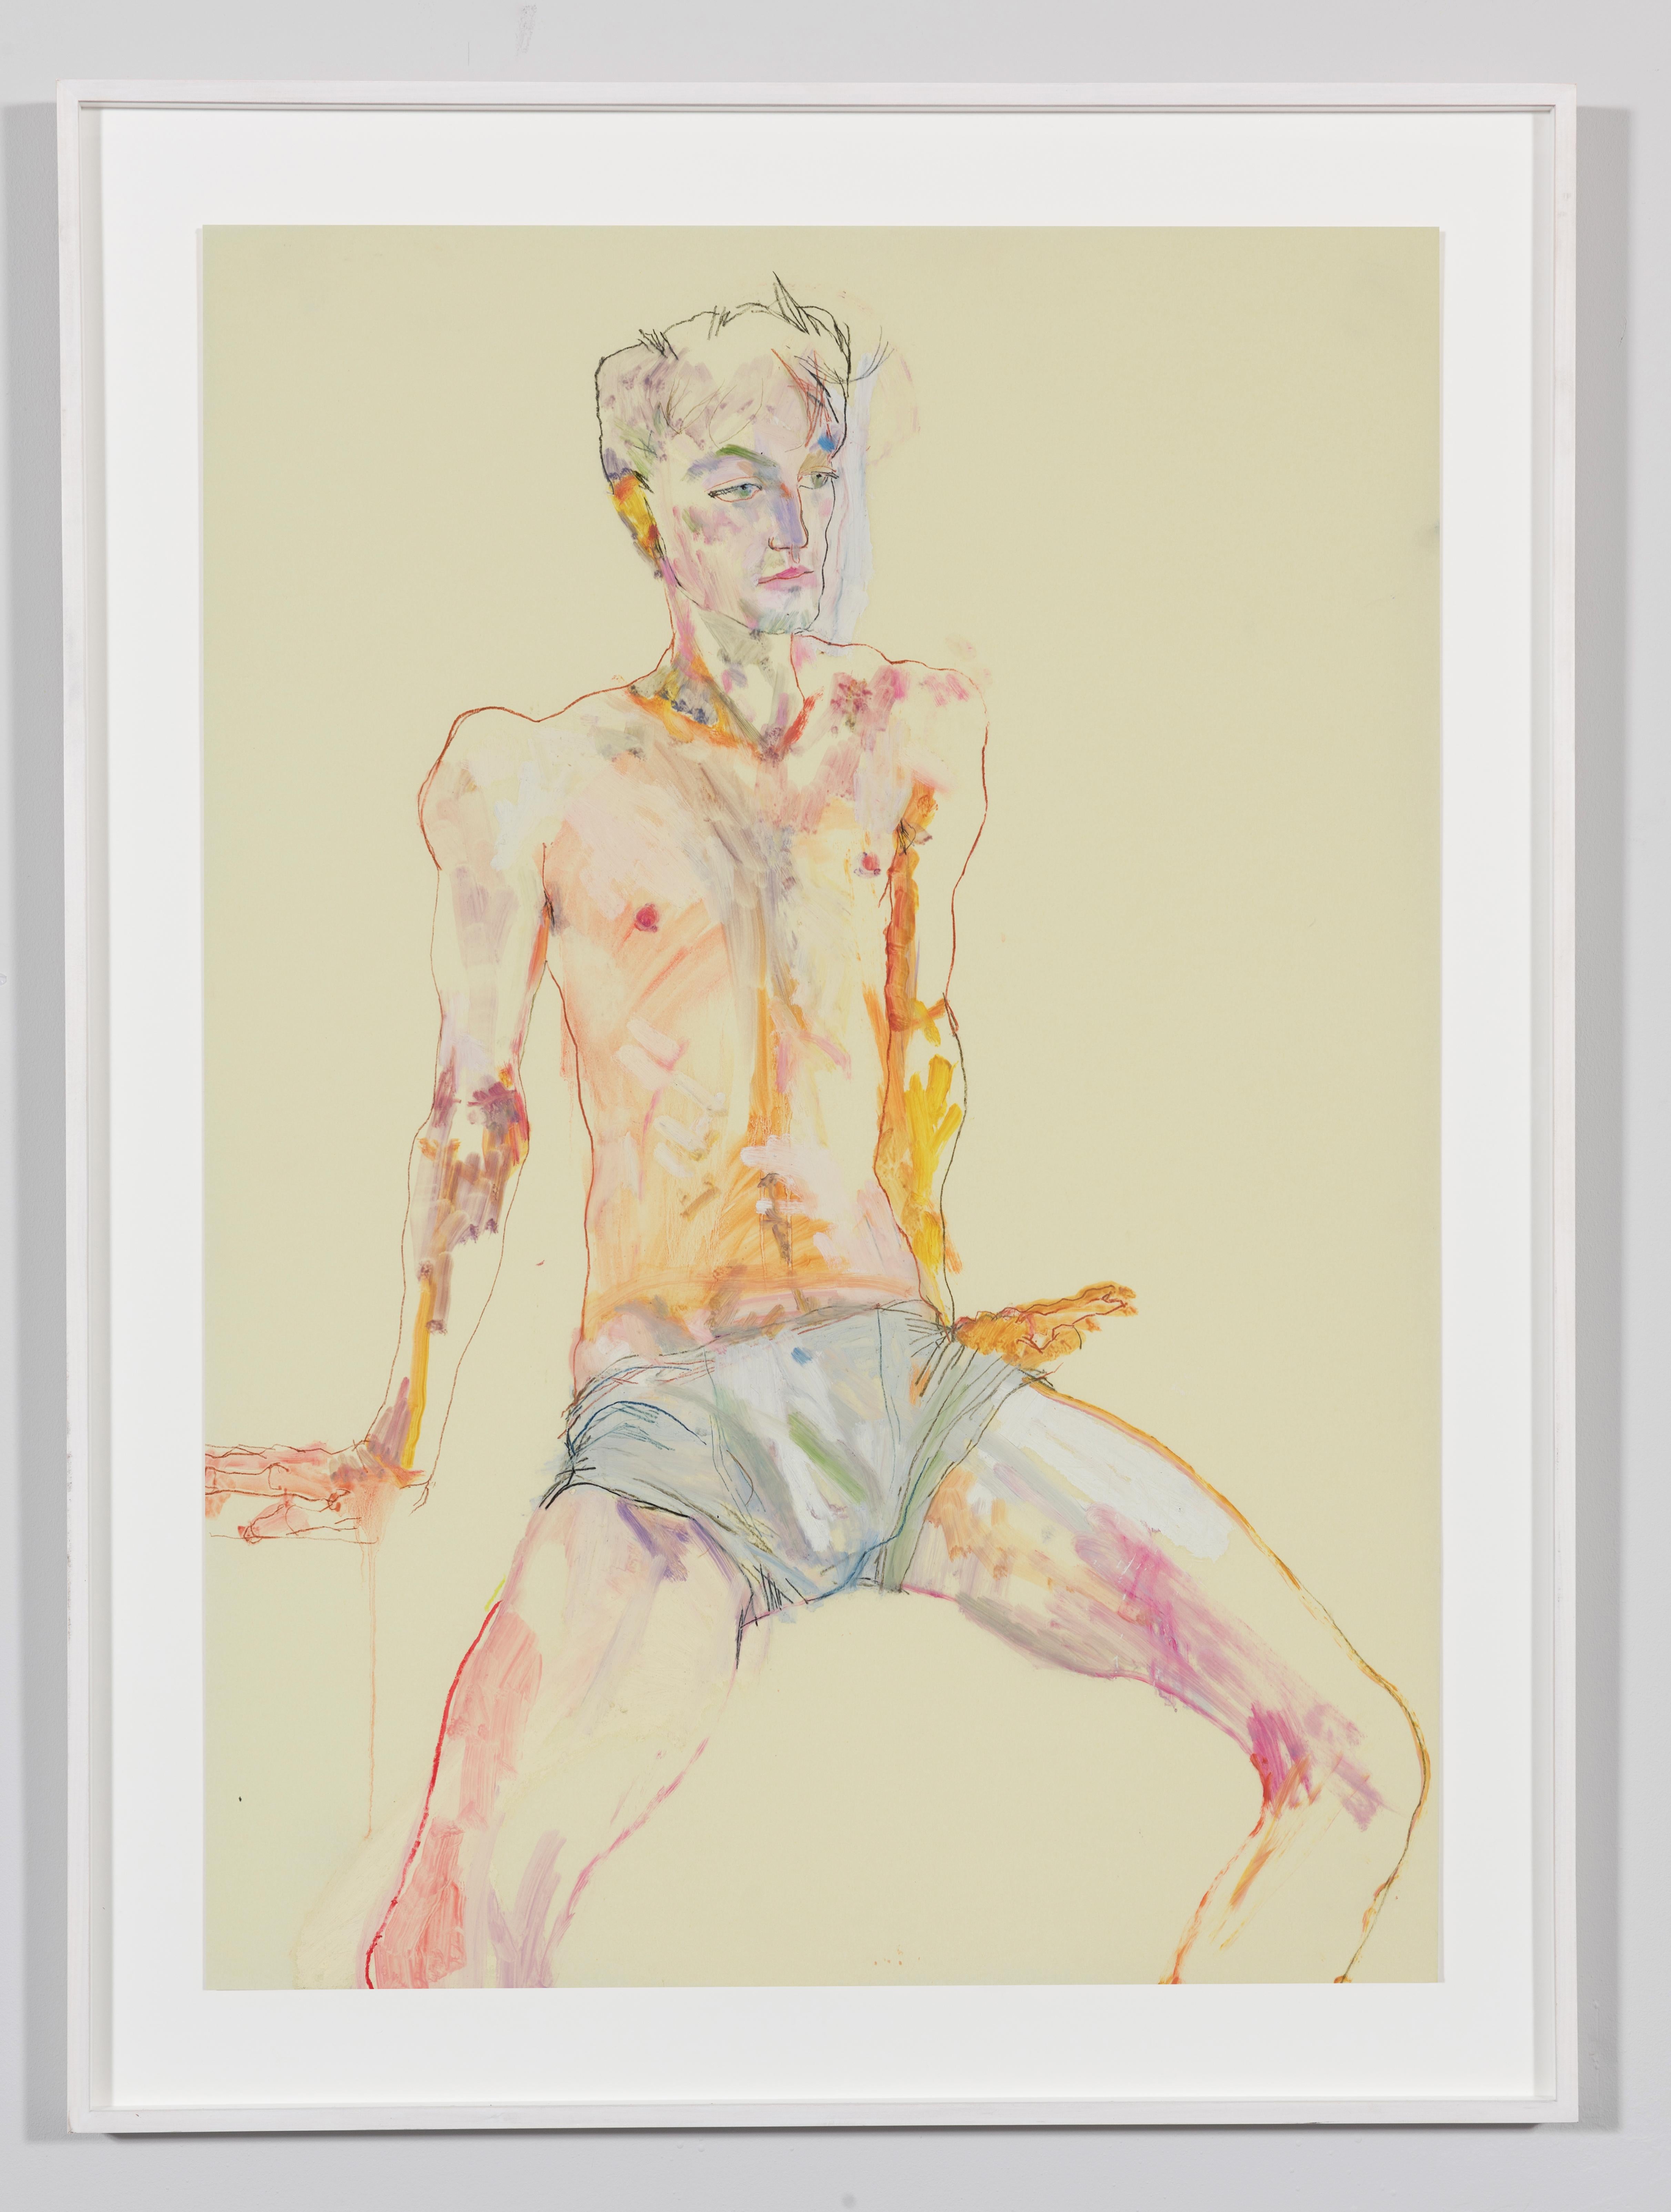 Andrew (Sitting, 3/4 Figure - Blue Shorts), Mixed media on Pergamenata parchment - Painting by Howard Tangye